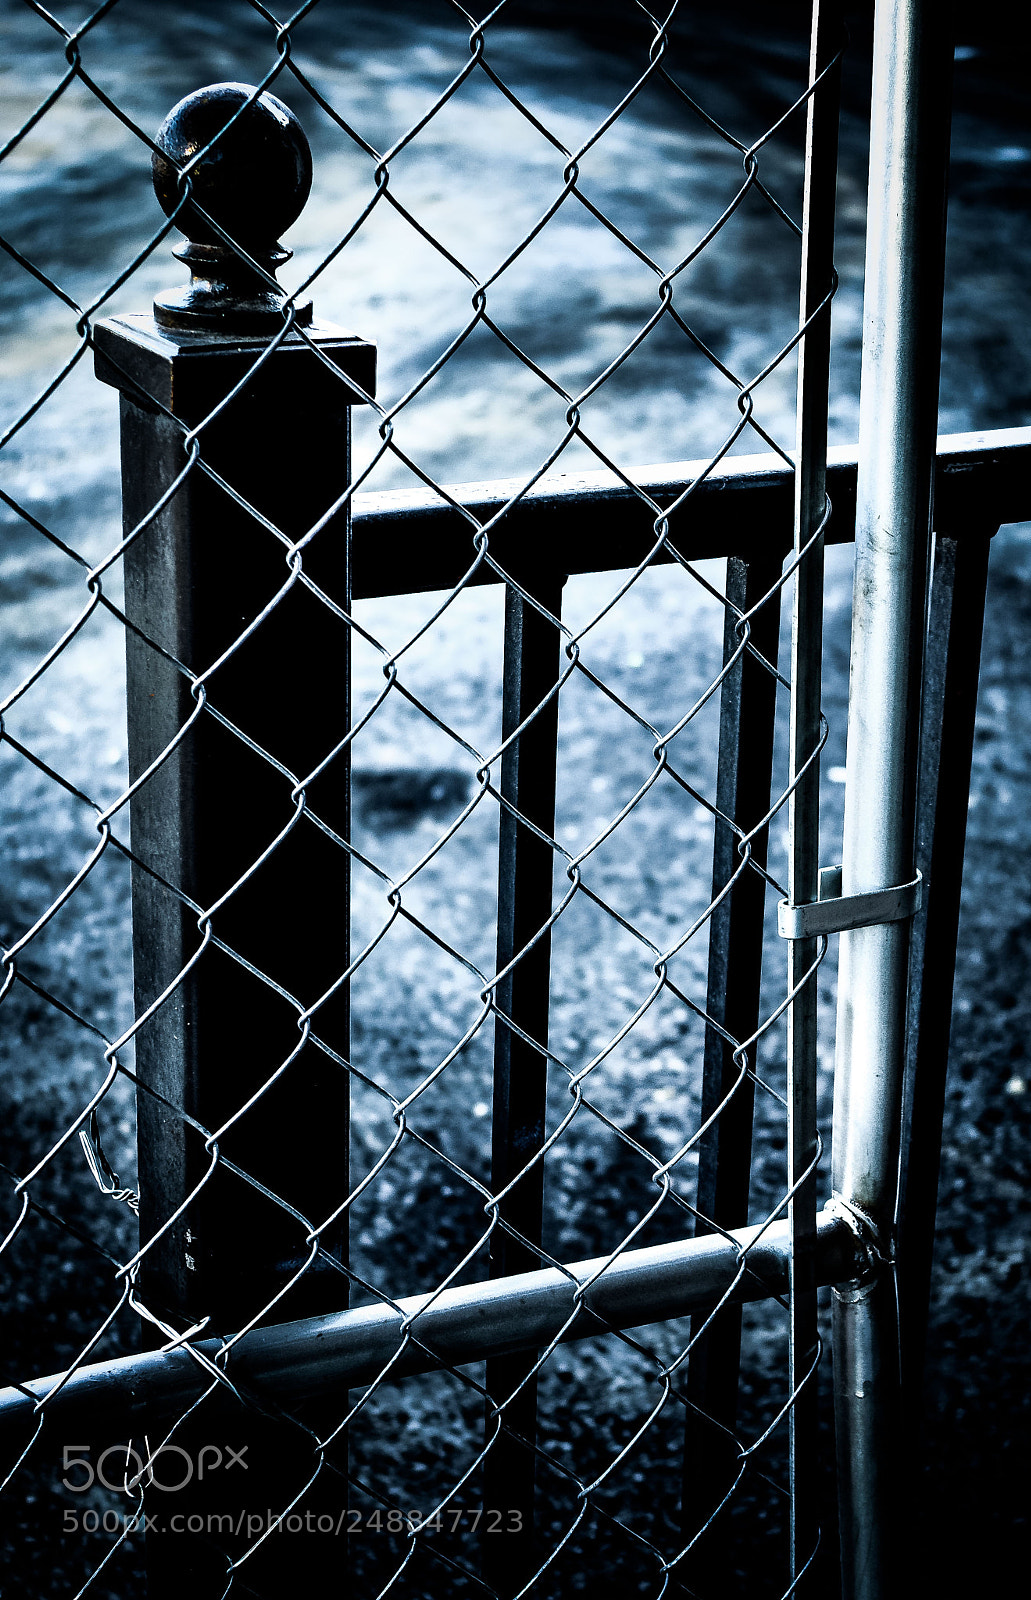 Pentax K-r sample photo. Fenced in no. 2 photography